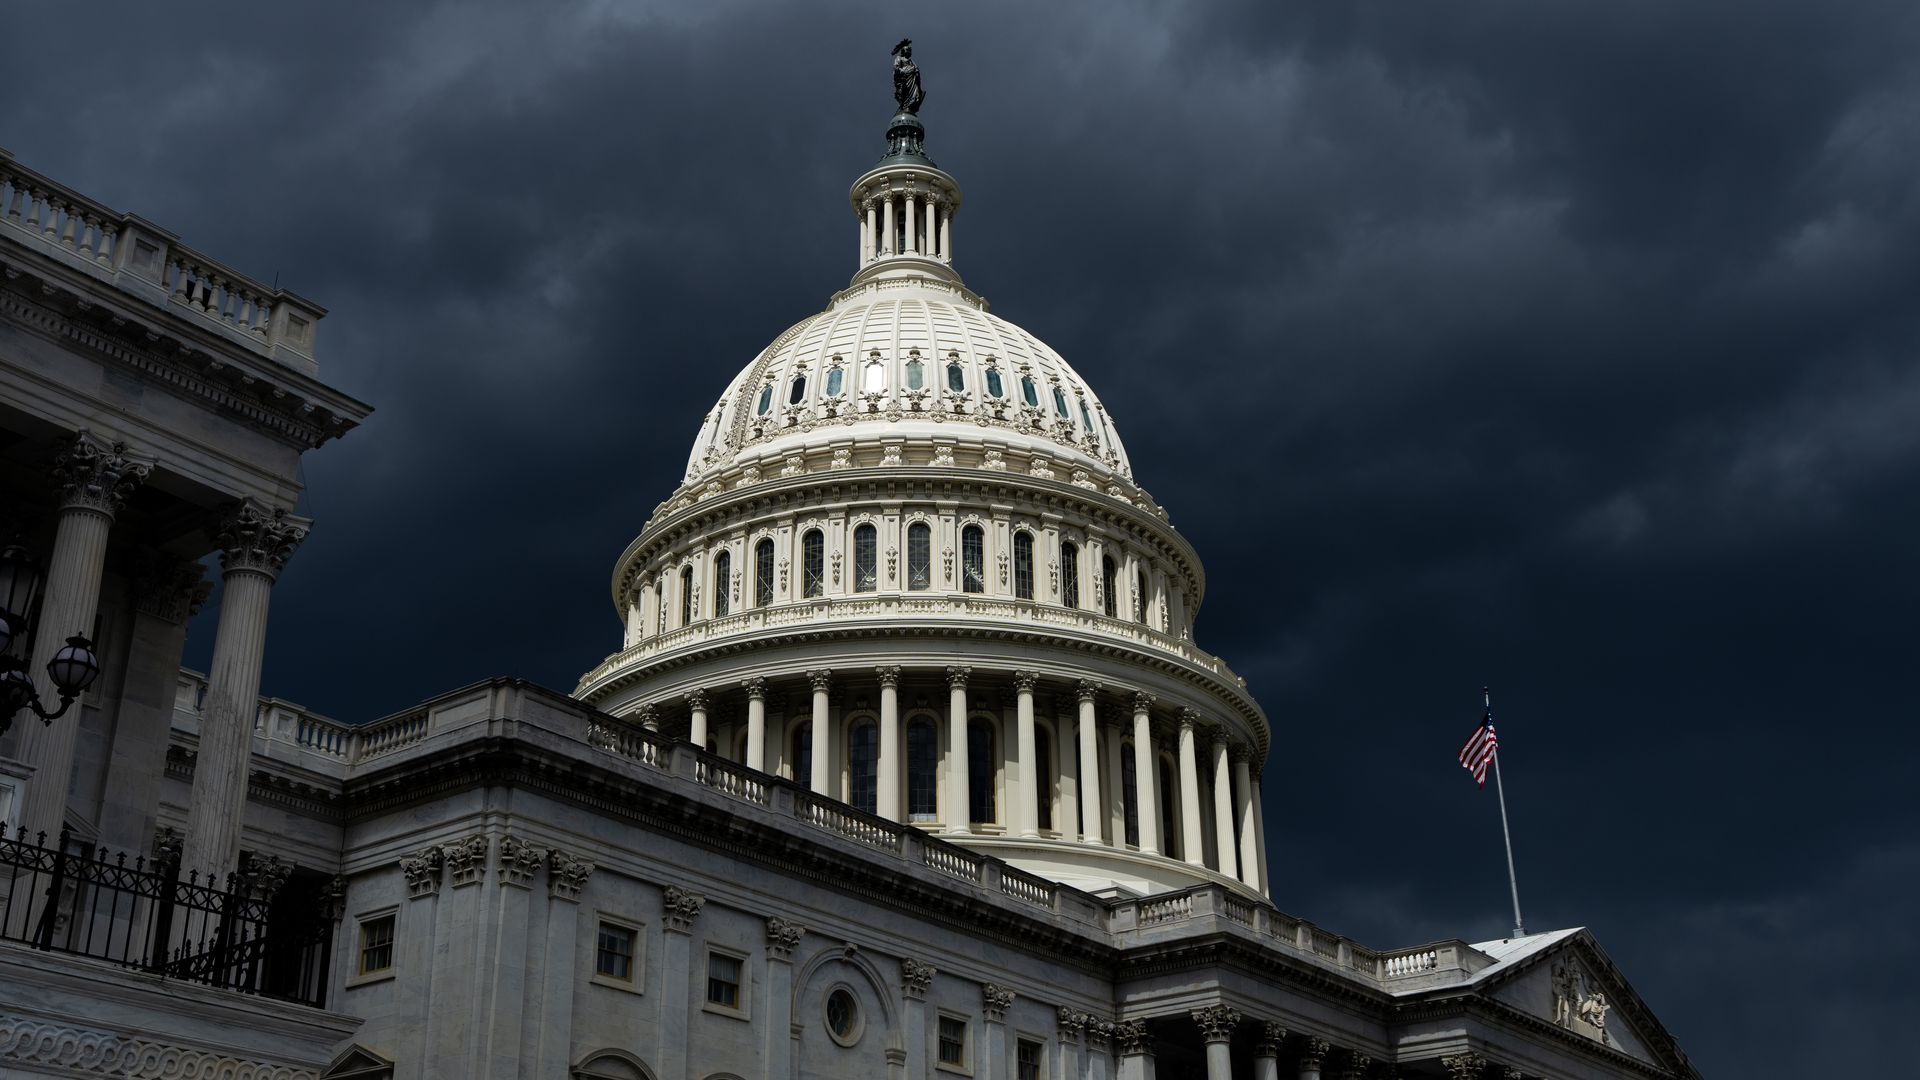 An image of the U.S. Capitol dome surrounded by storm clouds